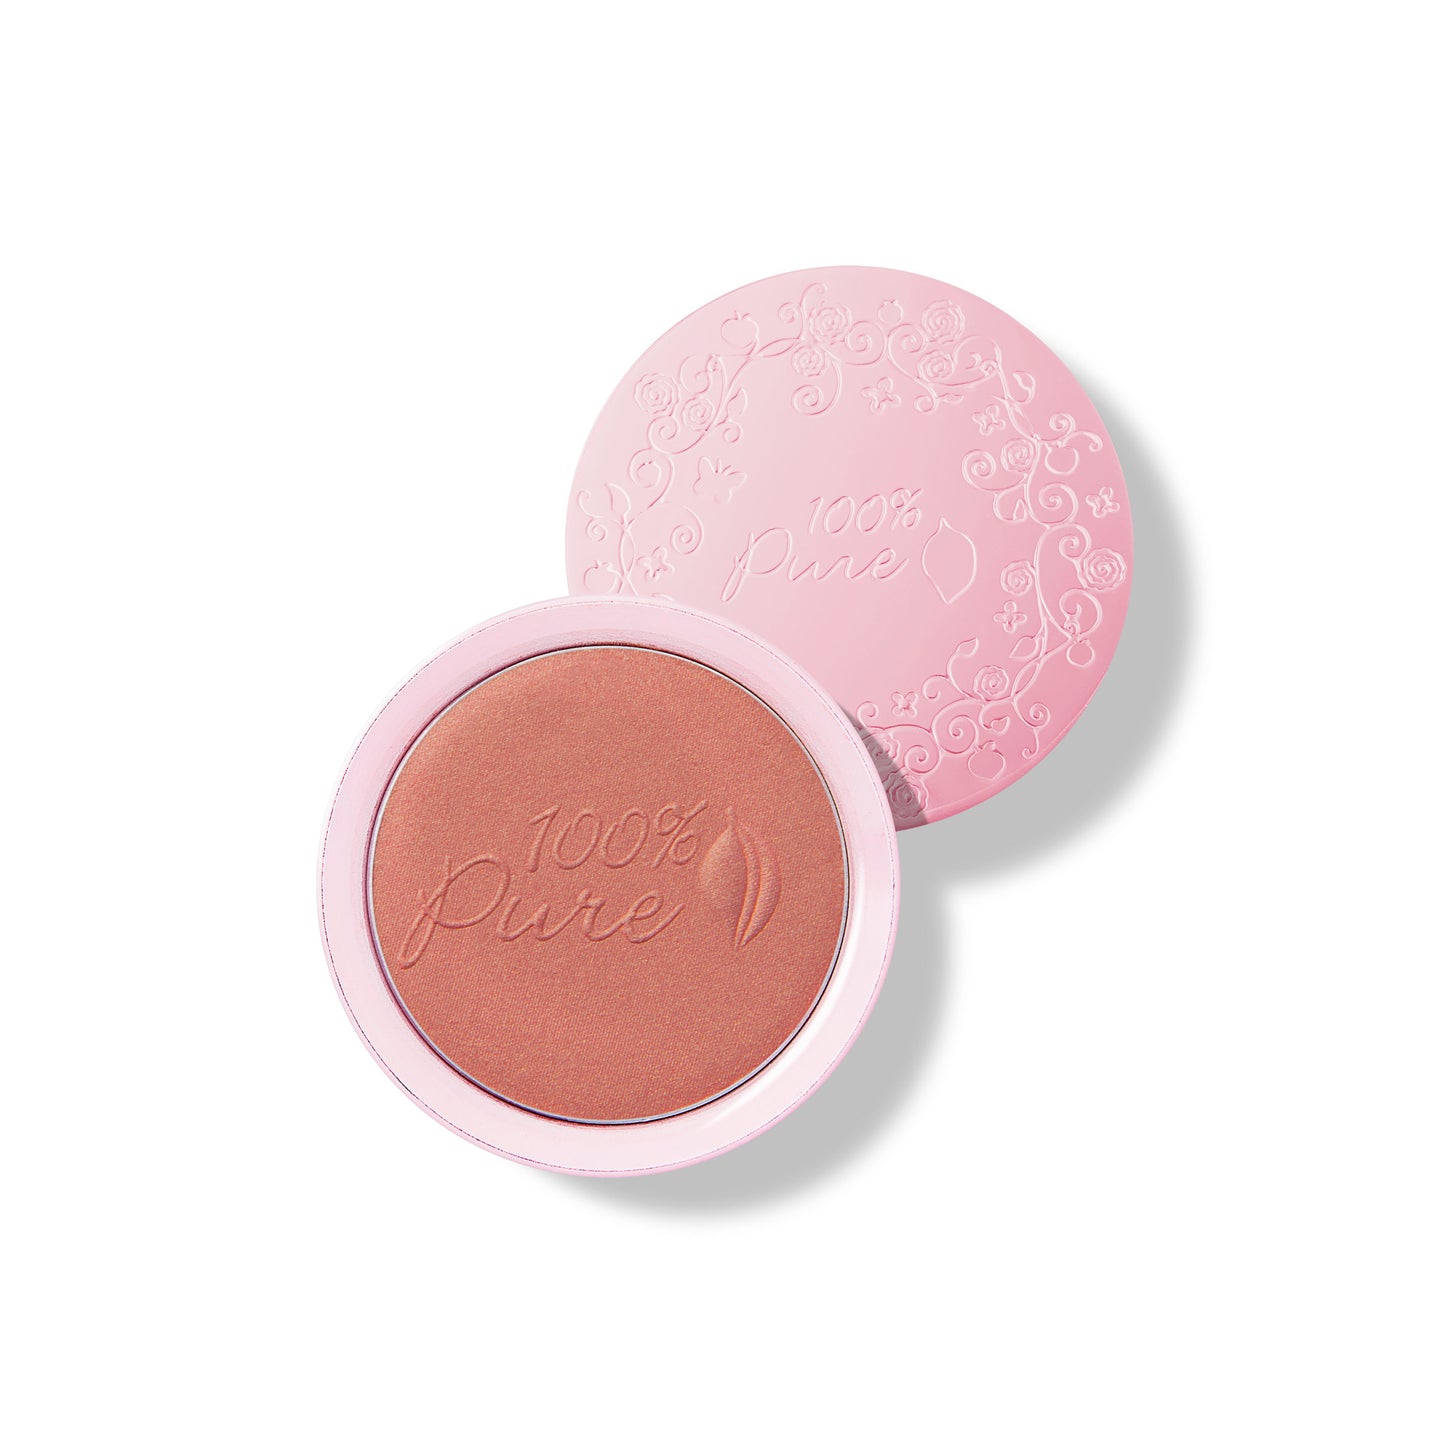 100% PURE Fruit Pigmented Blush pretty naked